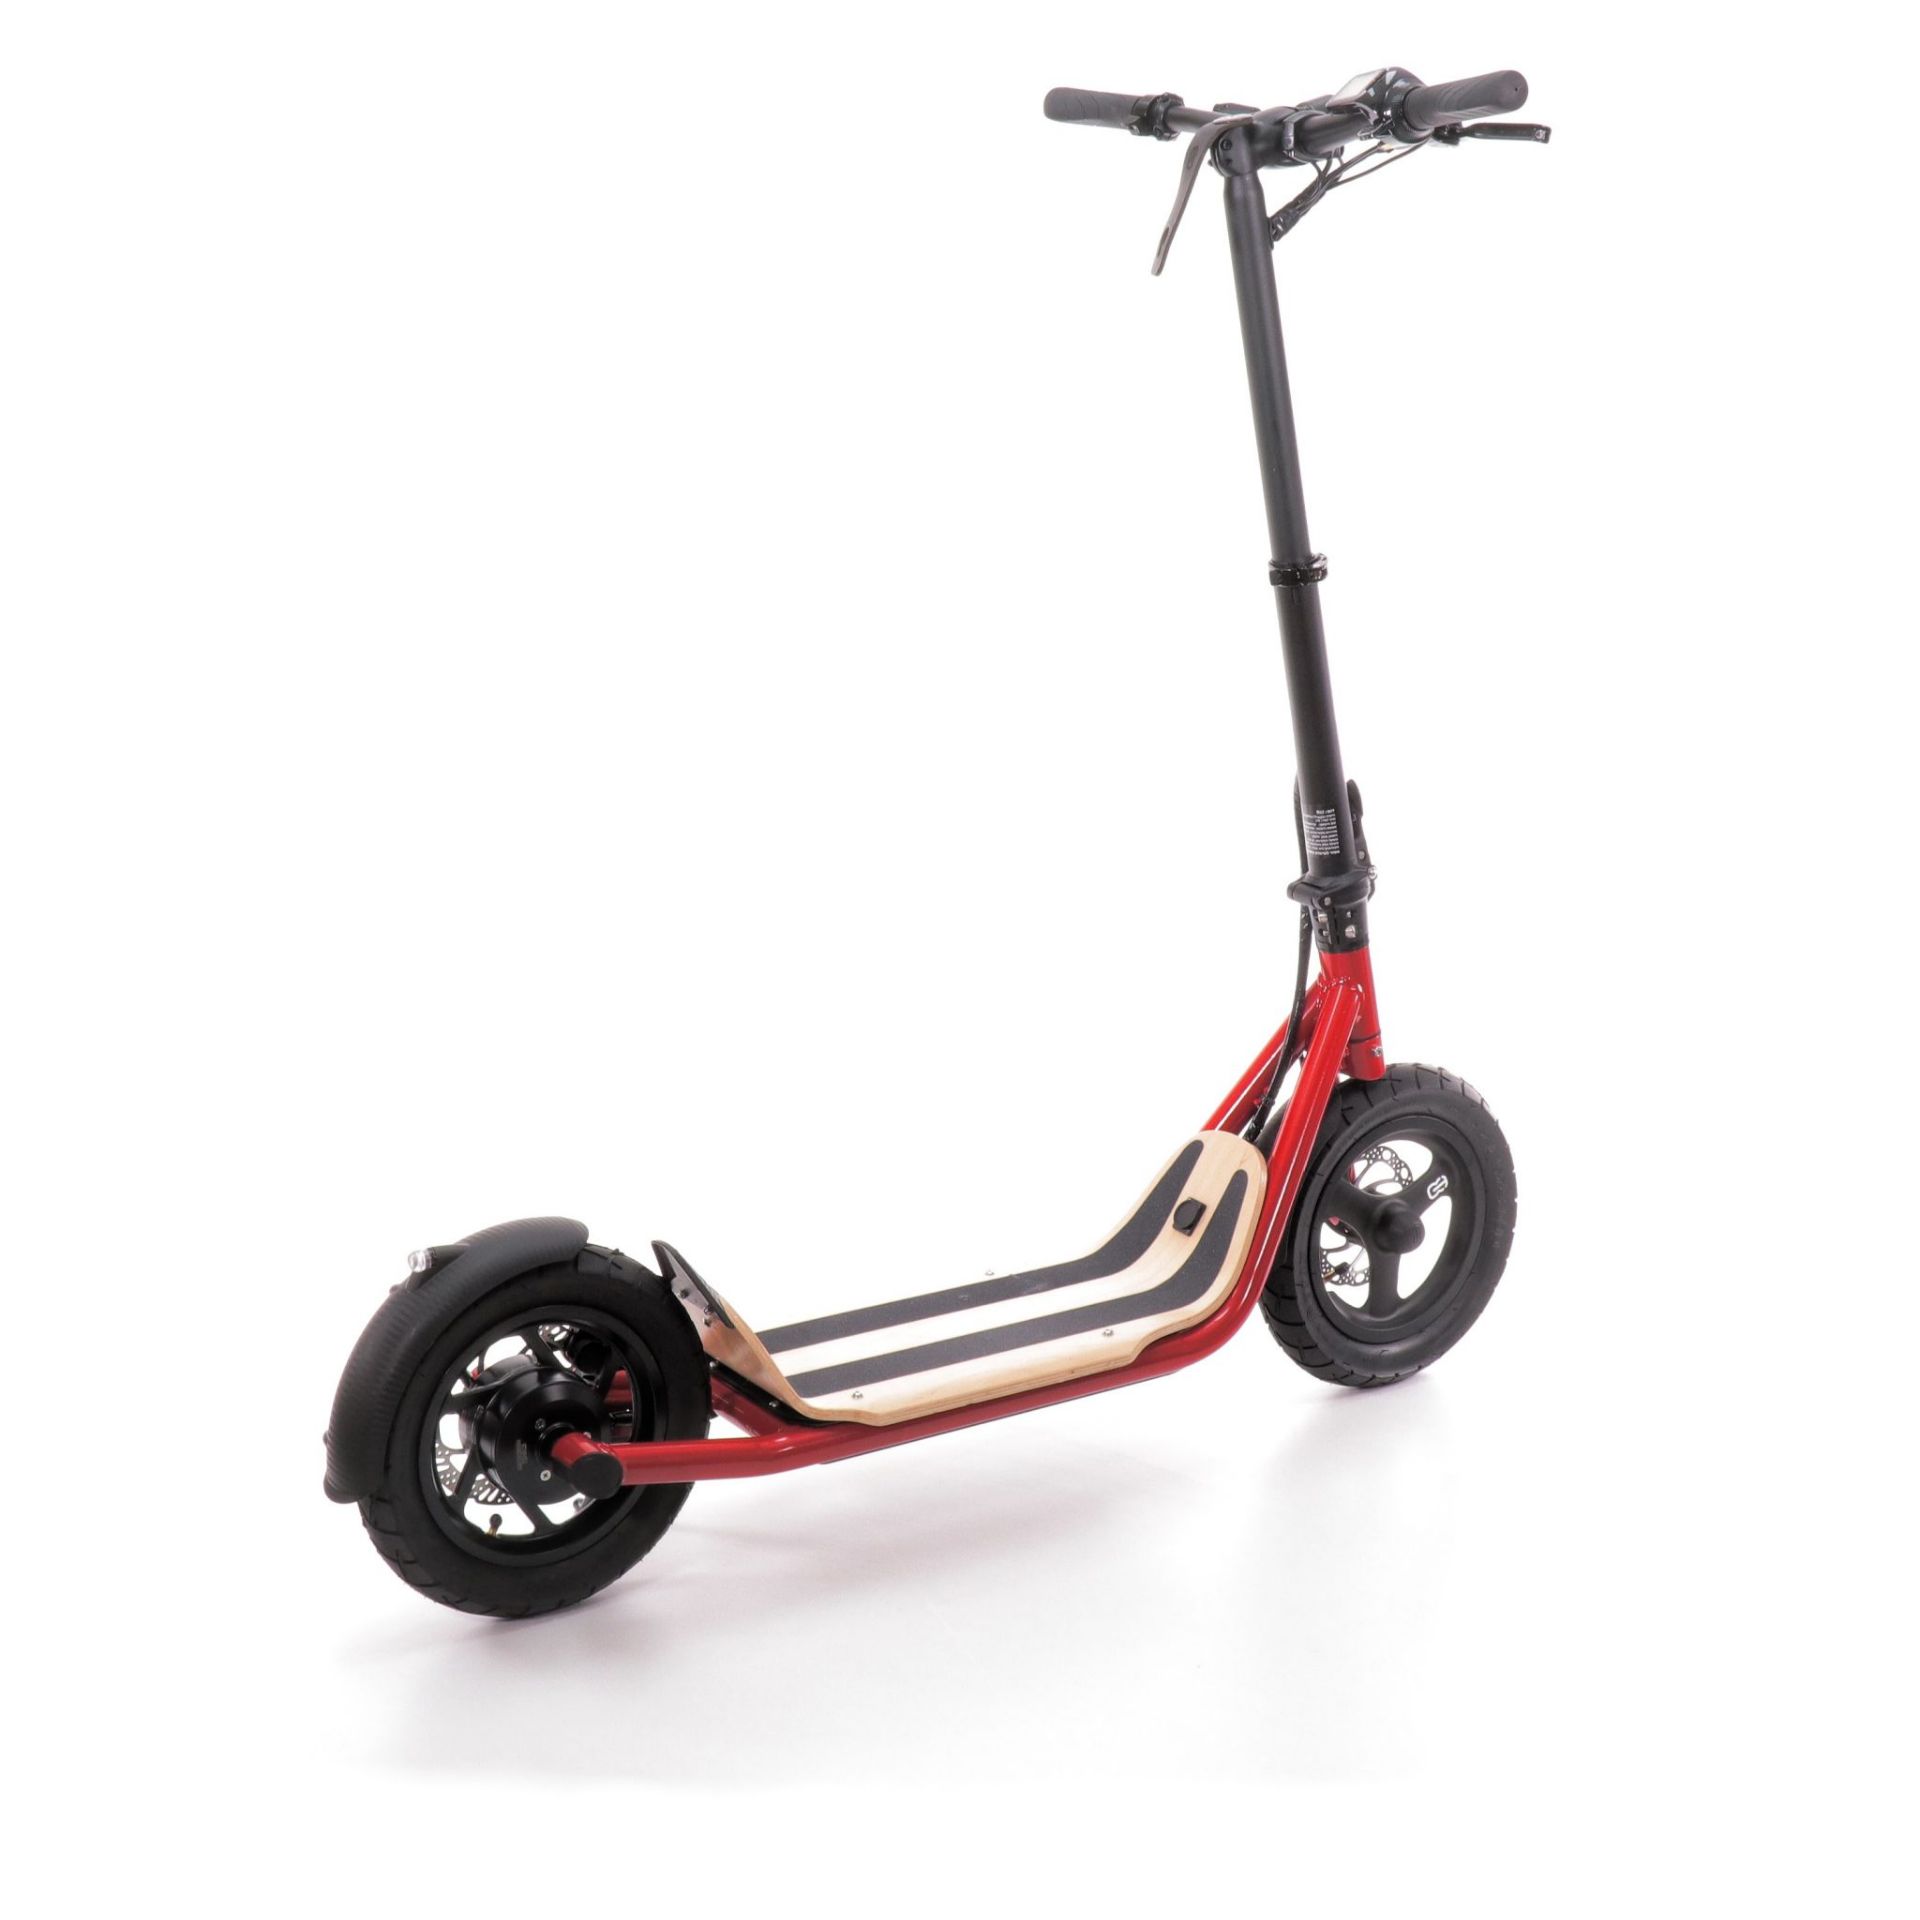 BRAND NEW 8TEV B12 PROXI ELECTRIC SCOOTER ORANGE RRP £1299, Perfect city commuter vehicle with - Image 2 of 3